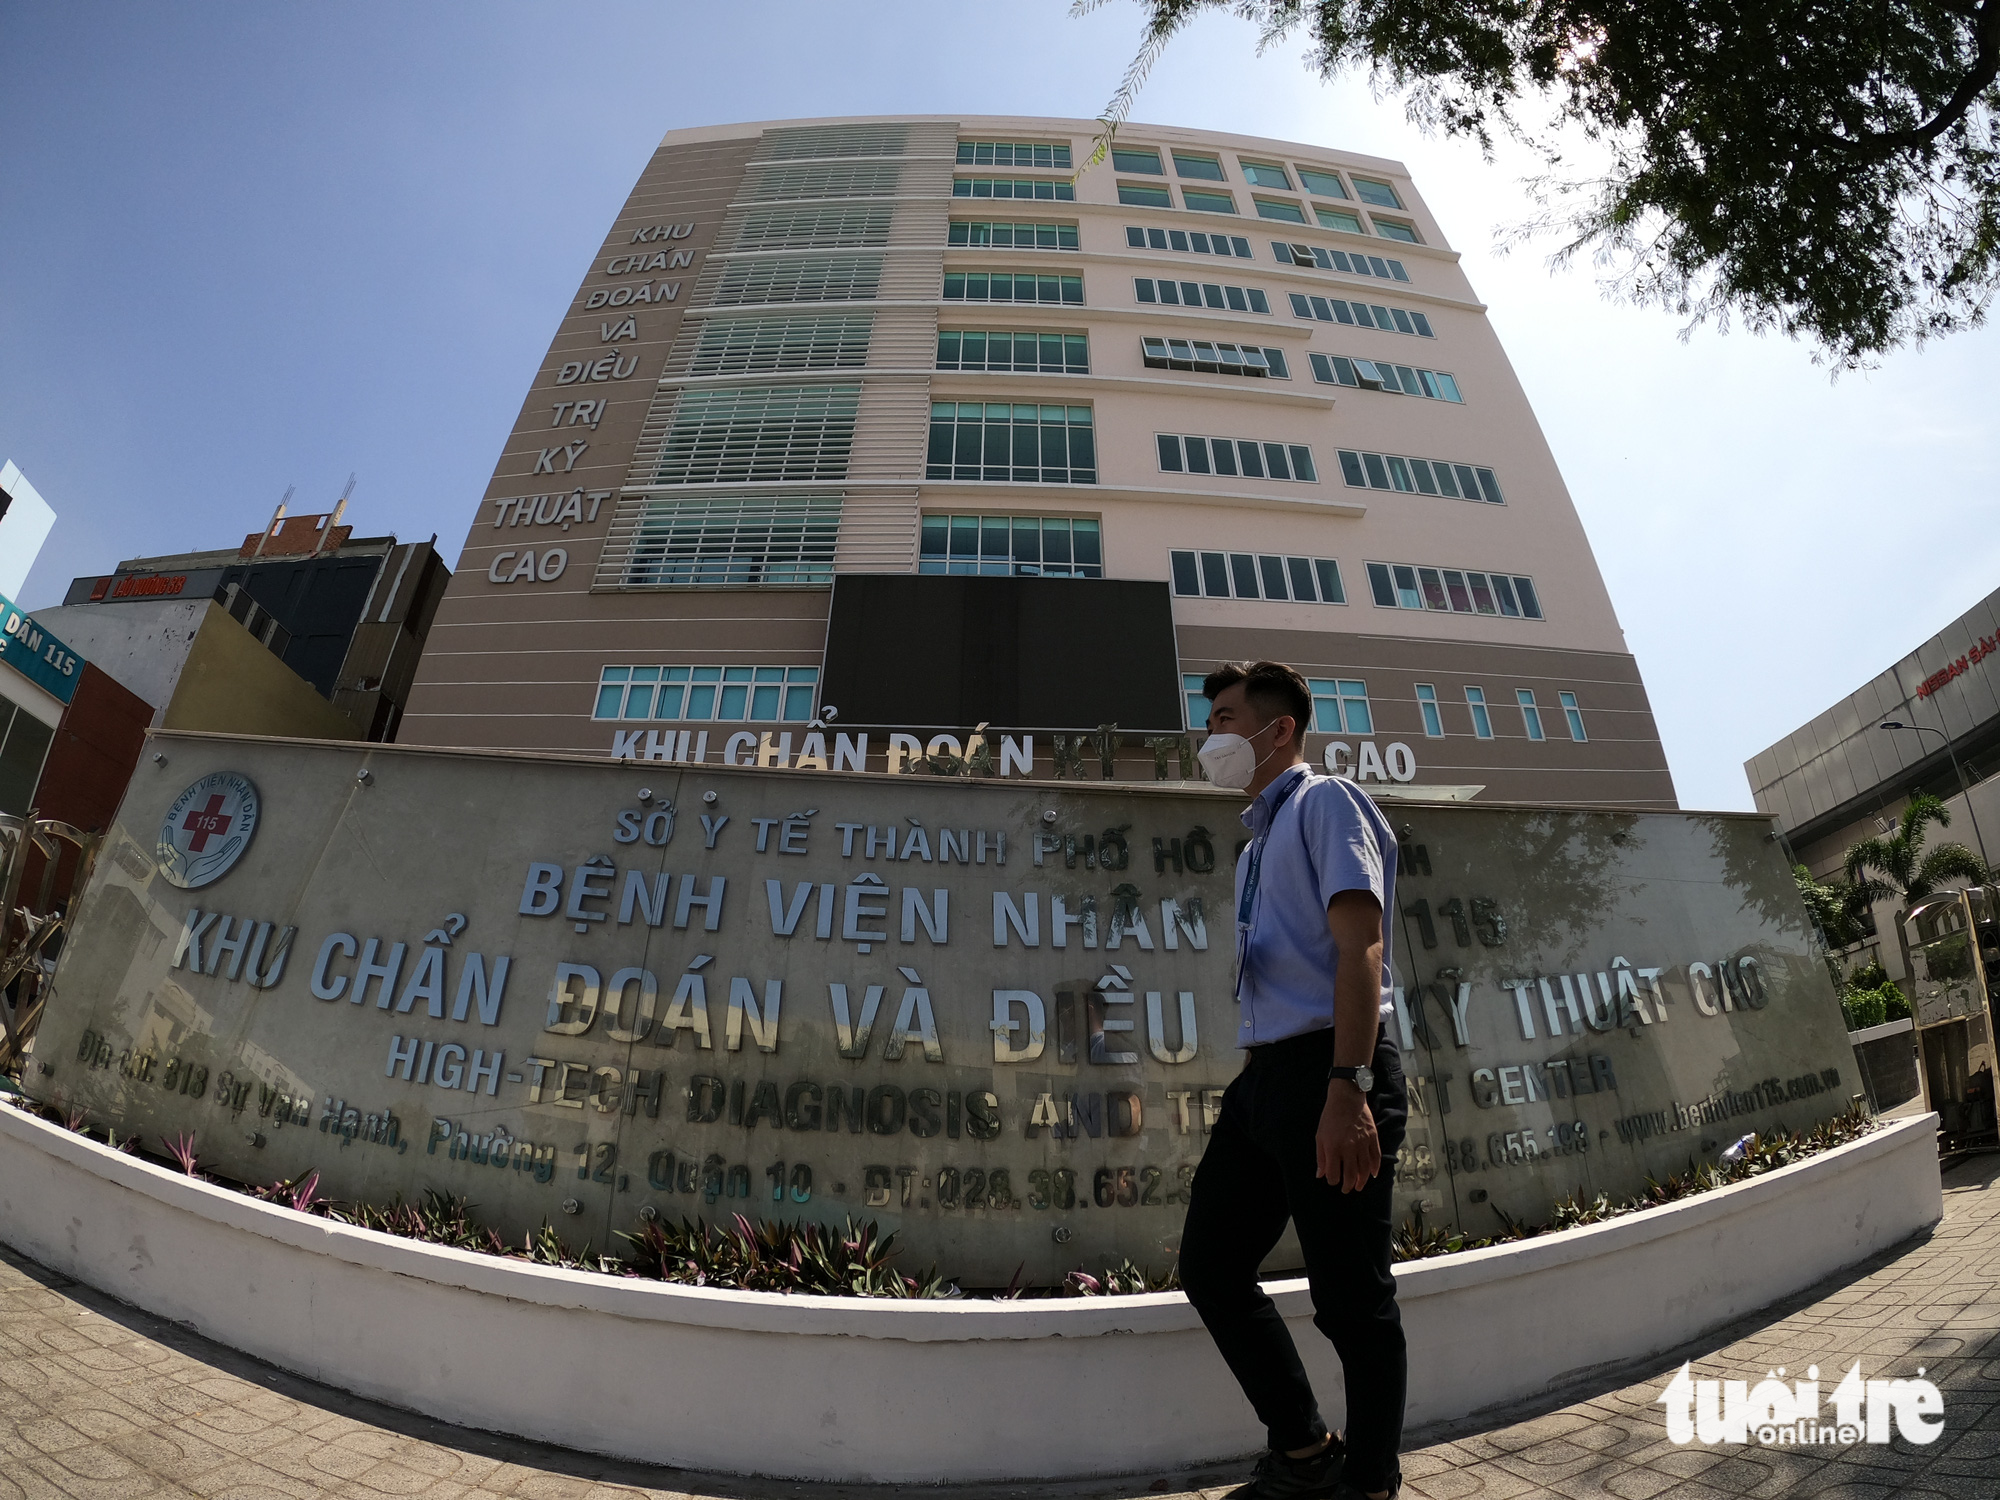 A man walks past the newly-built high-tech diagnostic and treatment department at the 115 People’s Hospital in District 10, Ho Chi Minh City. Photo: Hoang Loc / Tuoi Tre